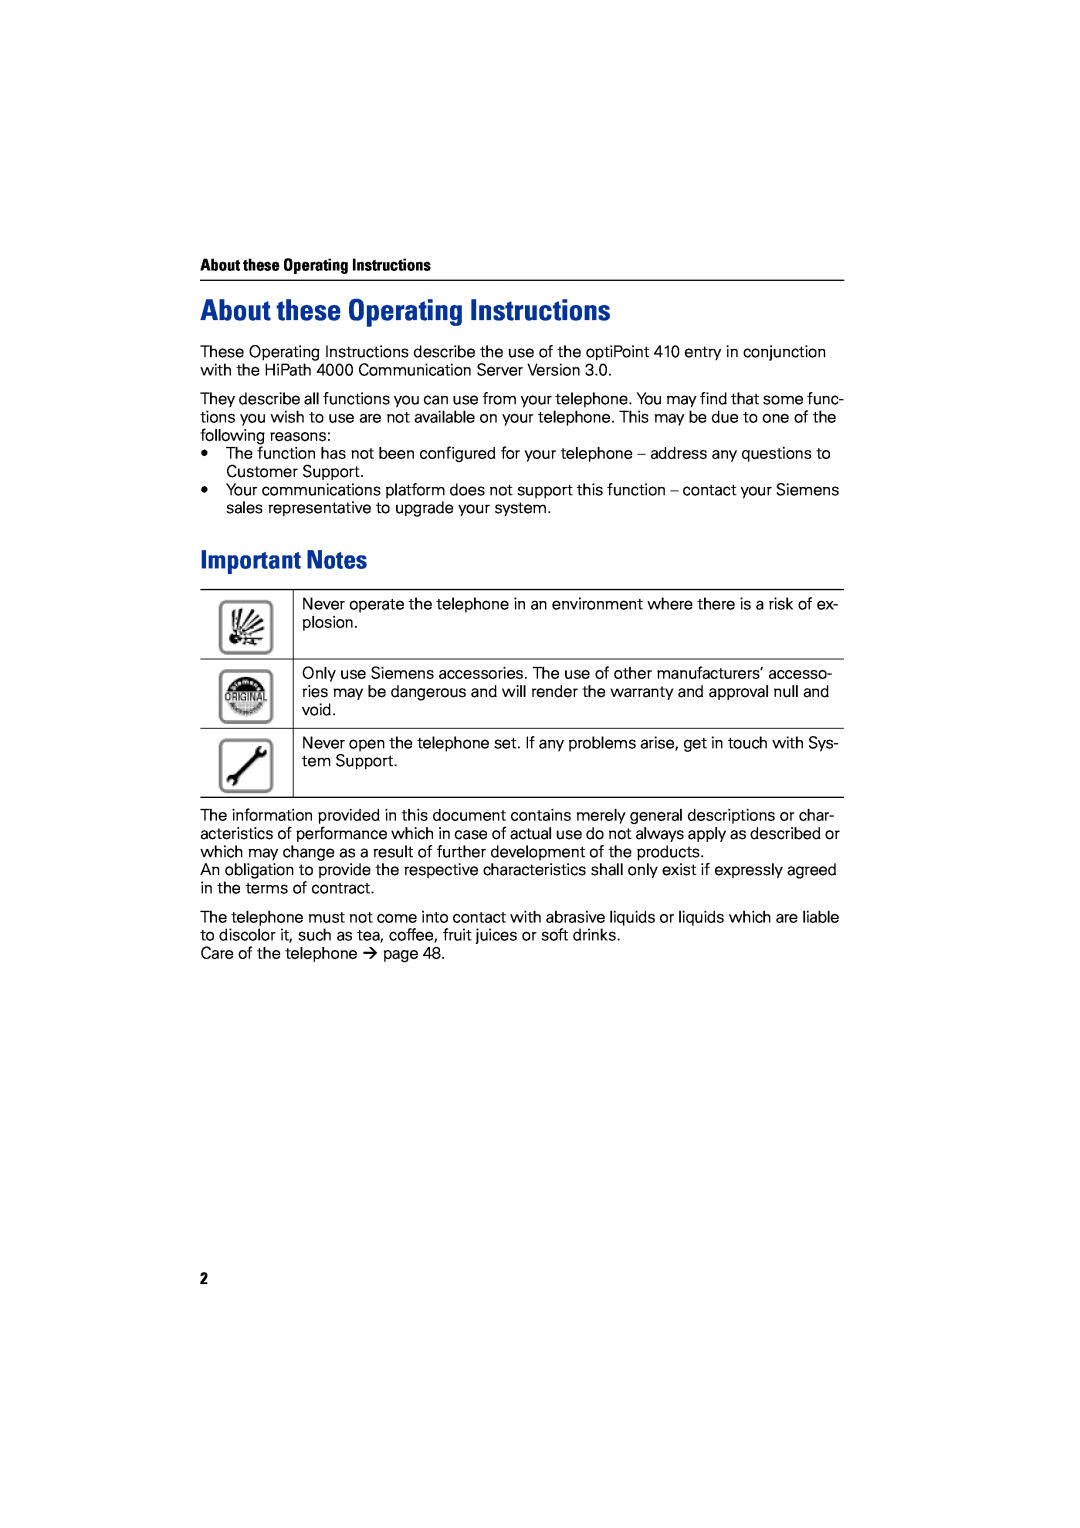 Siemens 4000 operating instructions About these Operating Instructions, Important Notes 